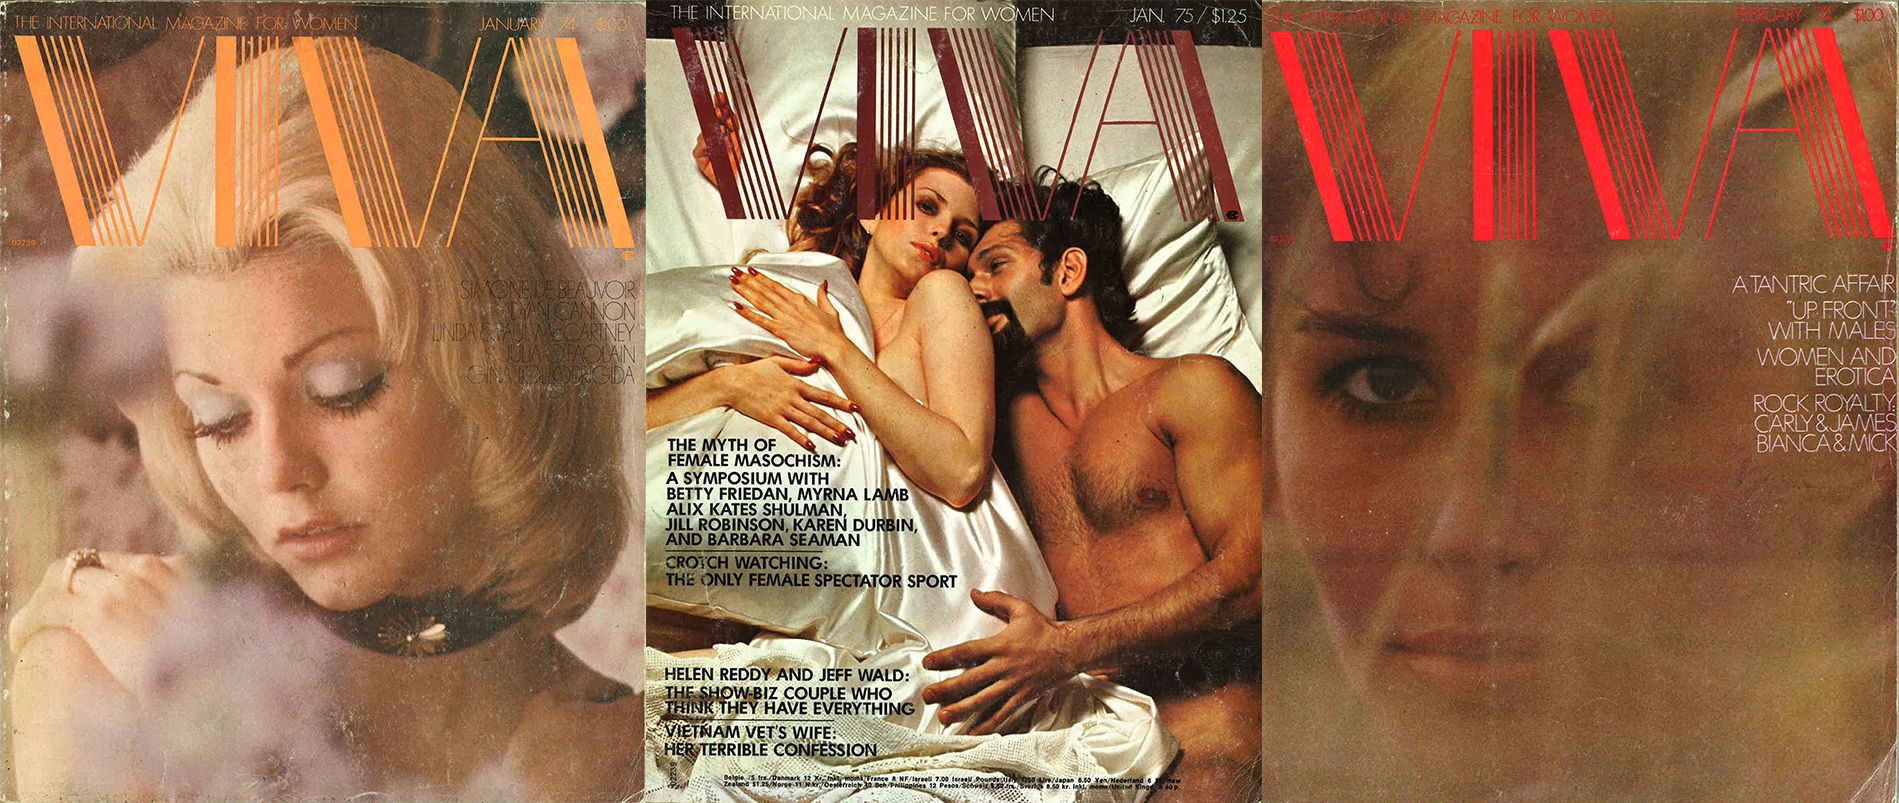 Vietnam Vintage Porn 1970s - An Oral History of Viva, the '70s Porn Magazine for Women